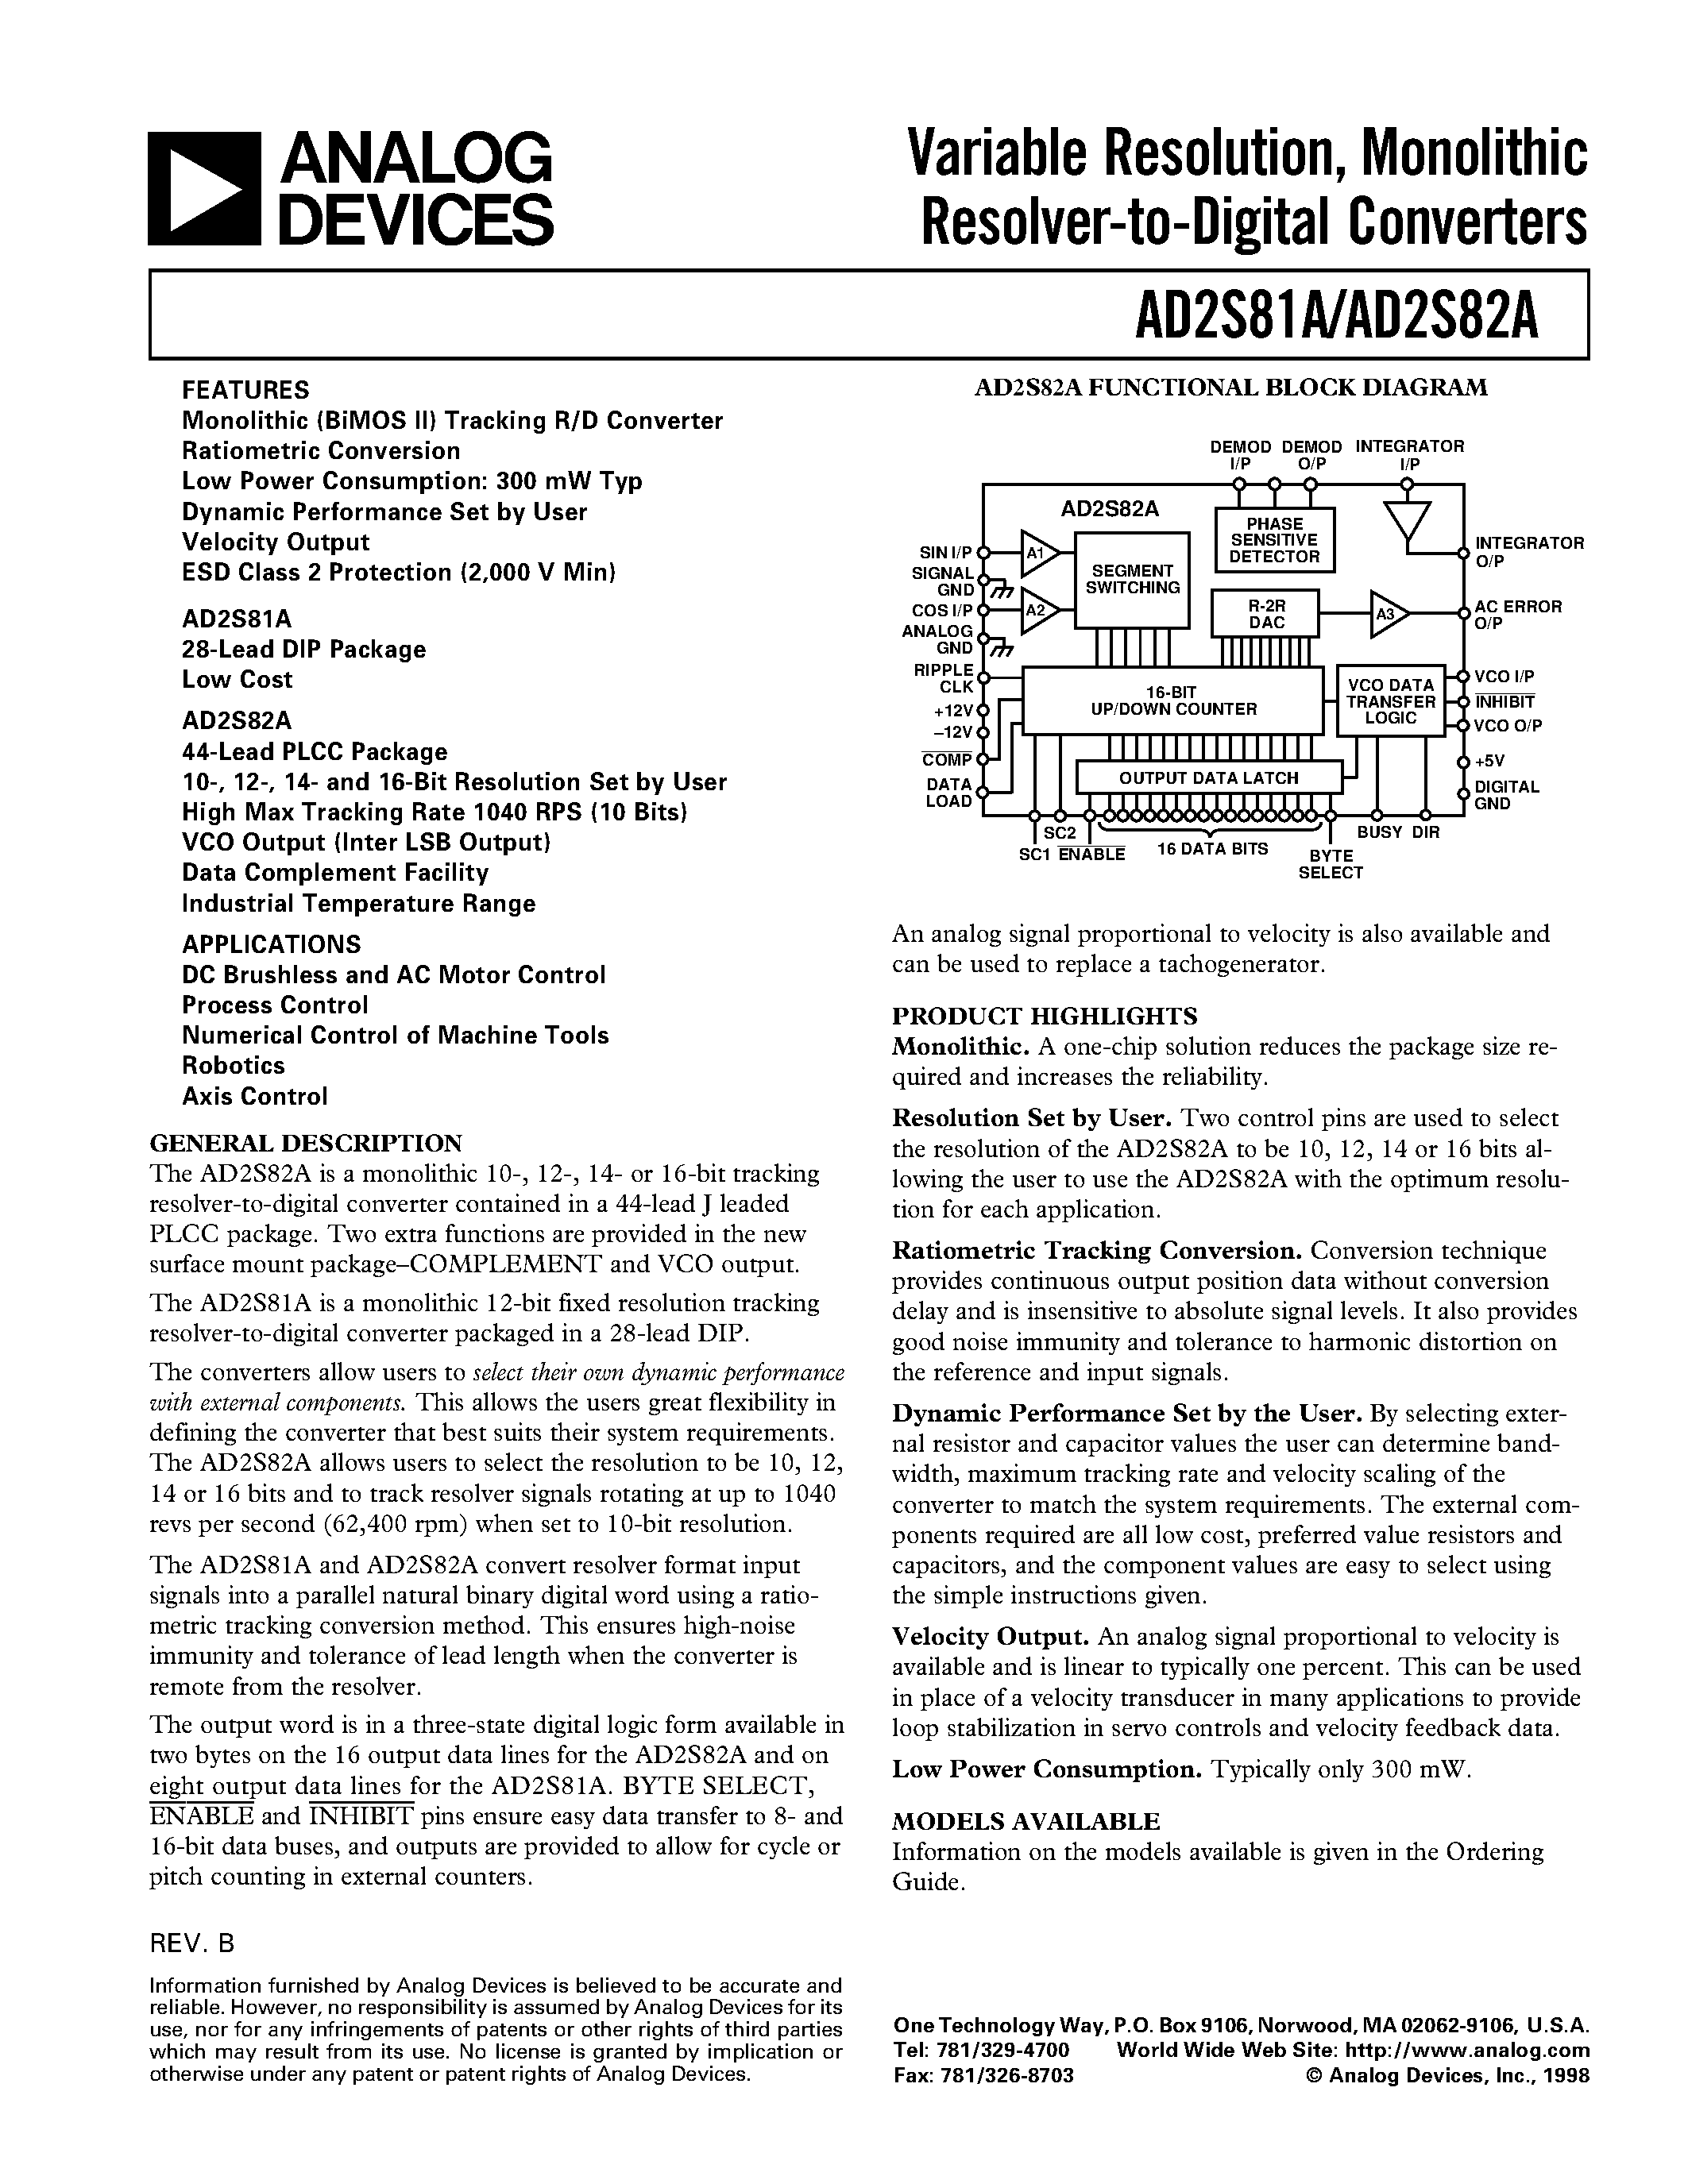 Datasheet AD2S82A - Variable Resolution/ Monolithic Resolver-to-Digital Converters page 1